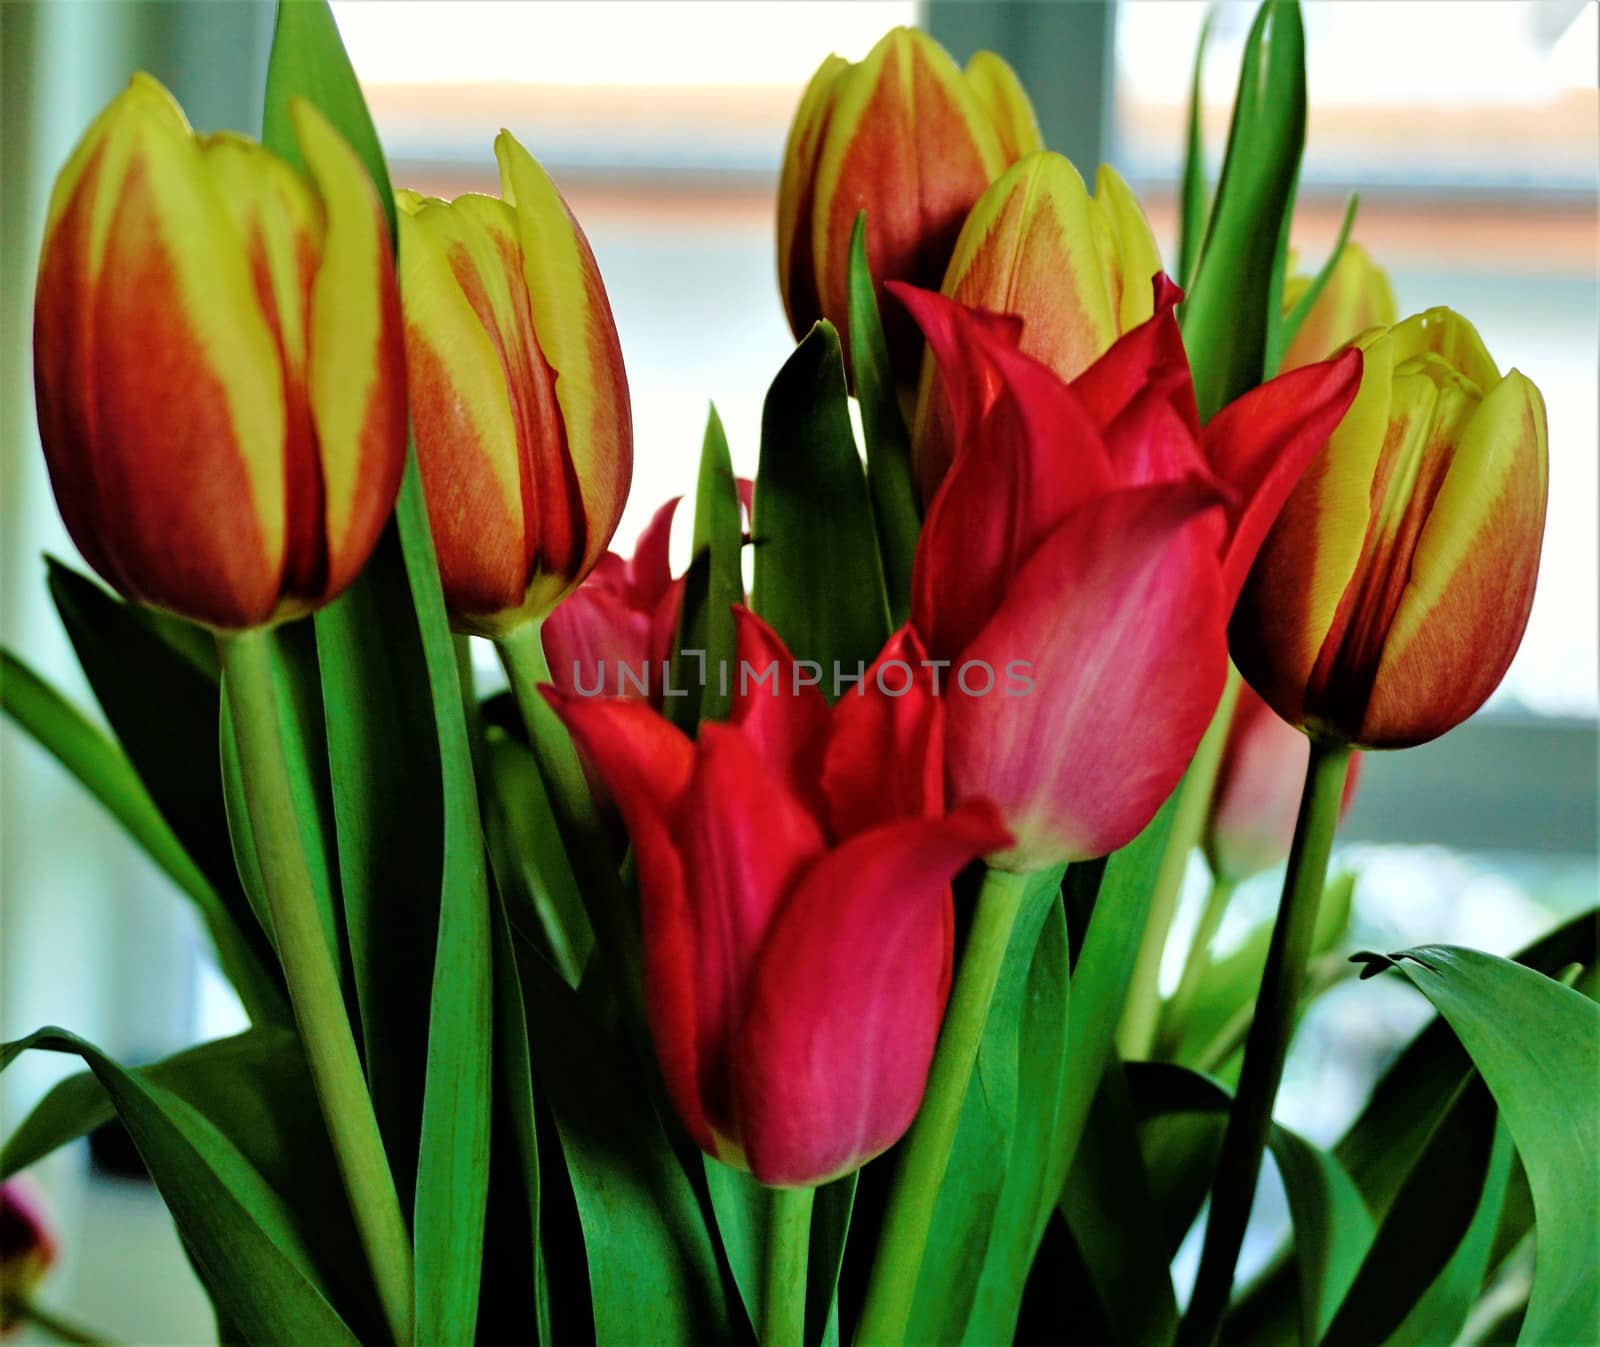 Bunch of colorful tulips by pisces2386